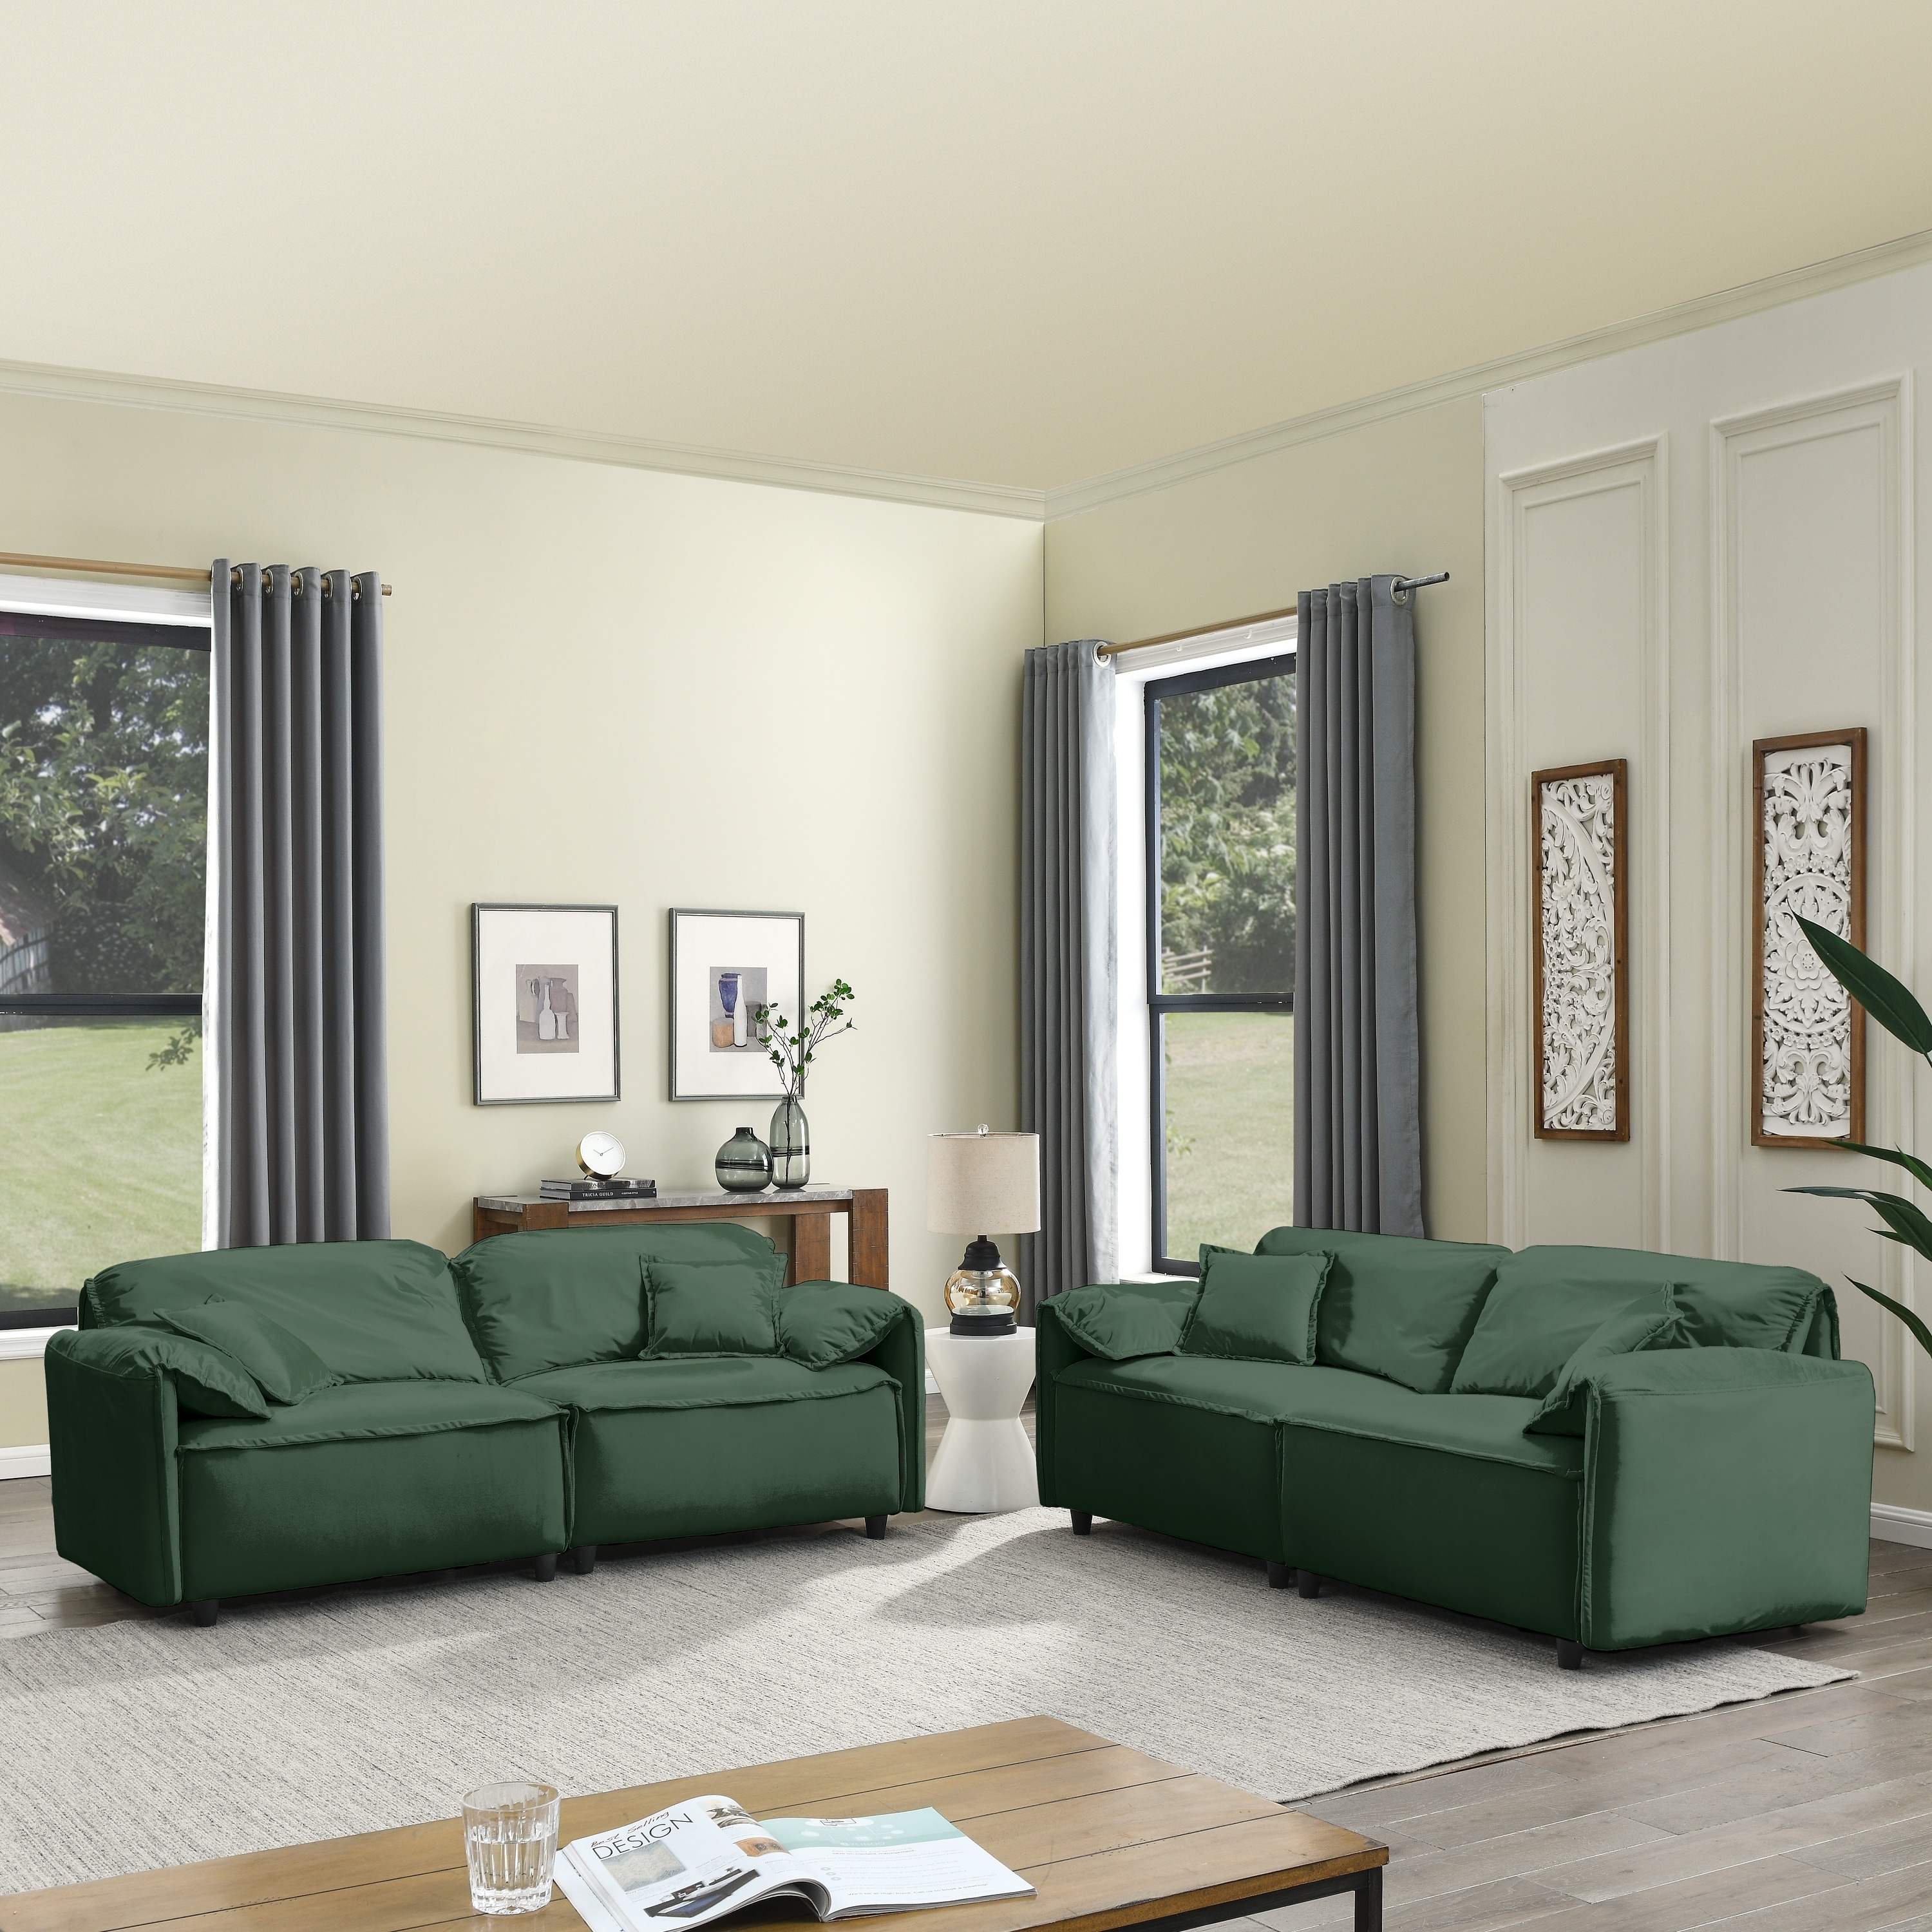 Modern 2 Pieces Velvet Padded Seat of 2 Seat Sofa and Loveseat